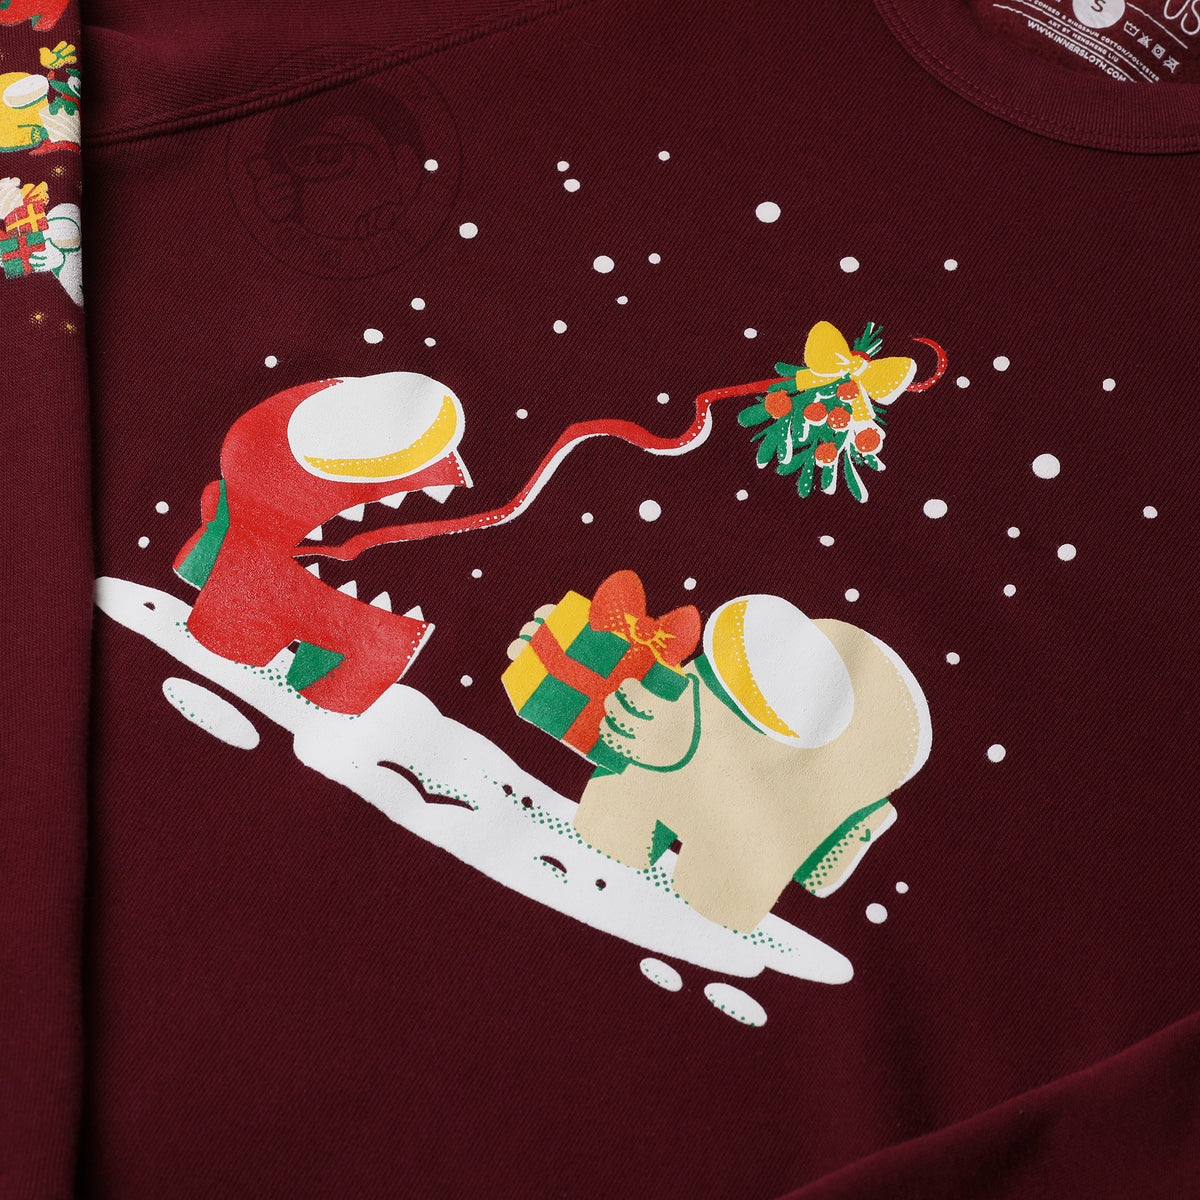 A close up photograph of the partial left sleeve detail and center shirt design. The central illustration depicts a snowy scene of a banana Crewmate holding a wrapped gift while the red Impostor uses its tongue to hold up a mistletoe overhead.